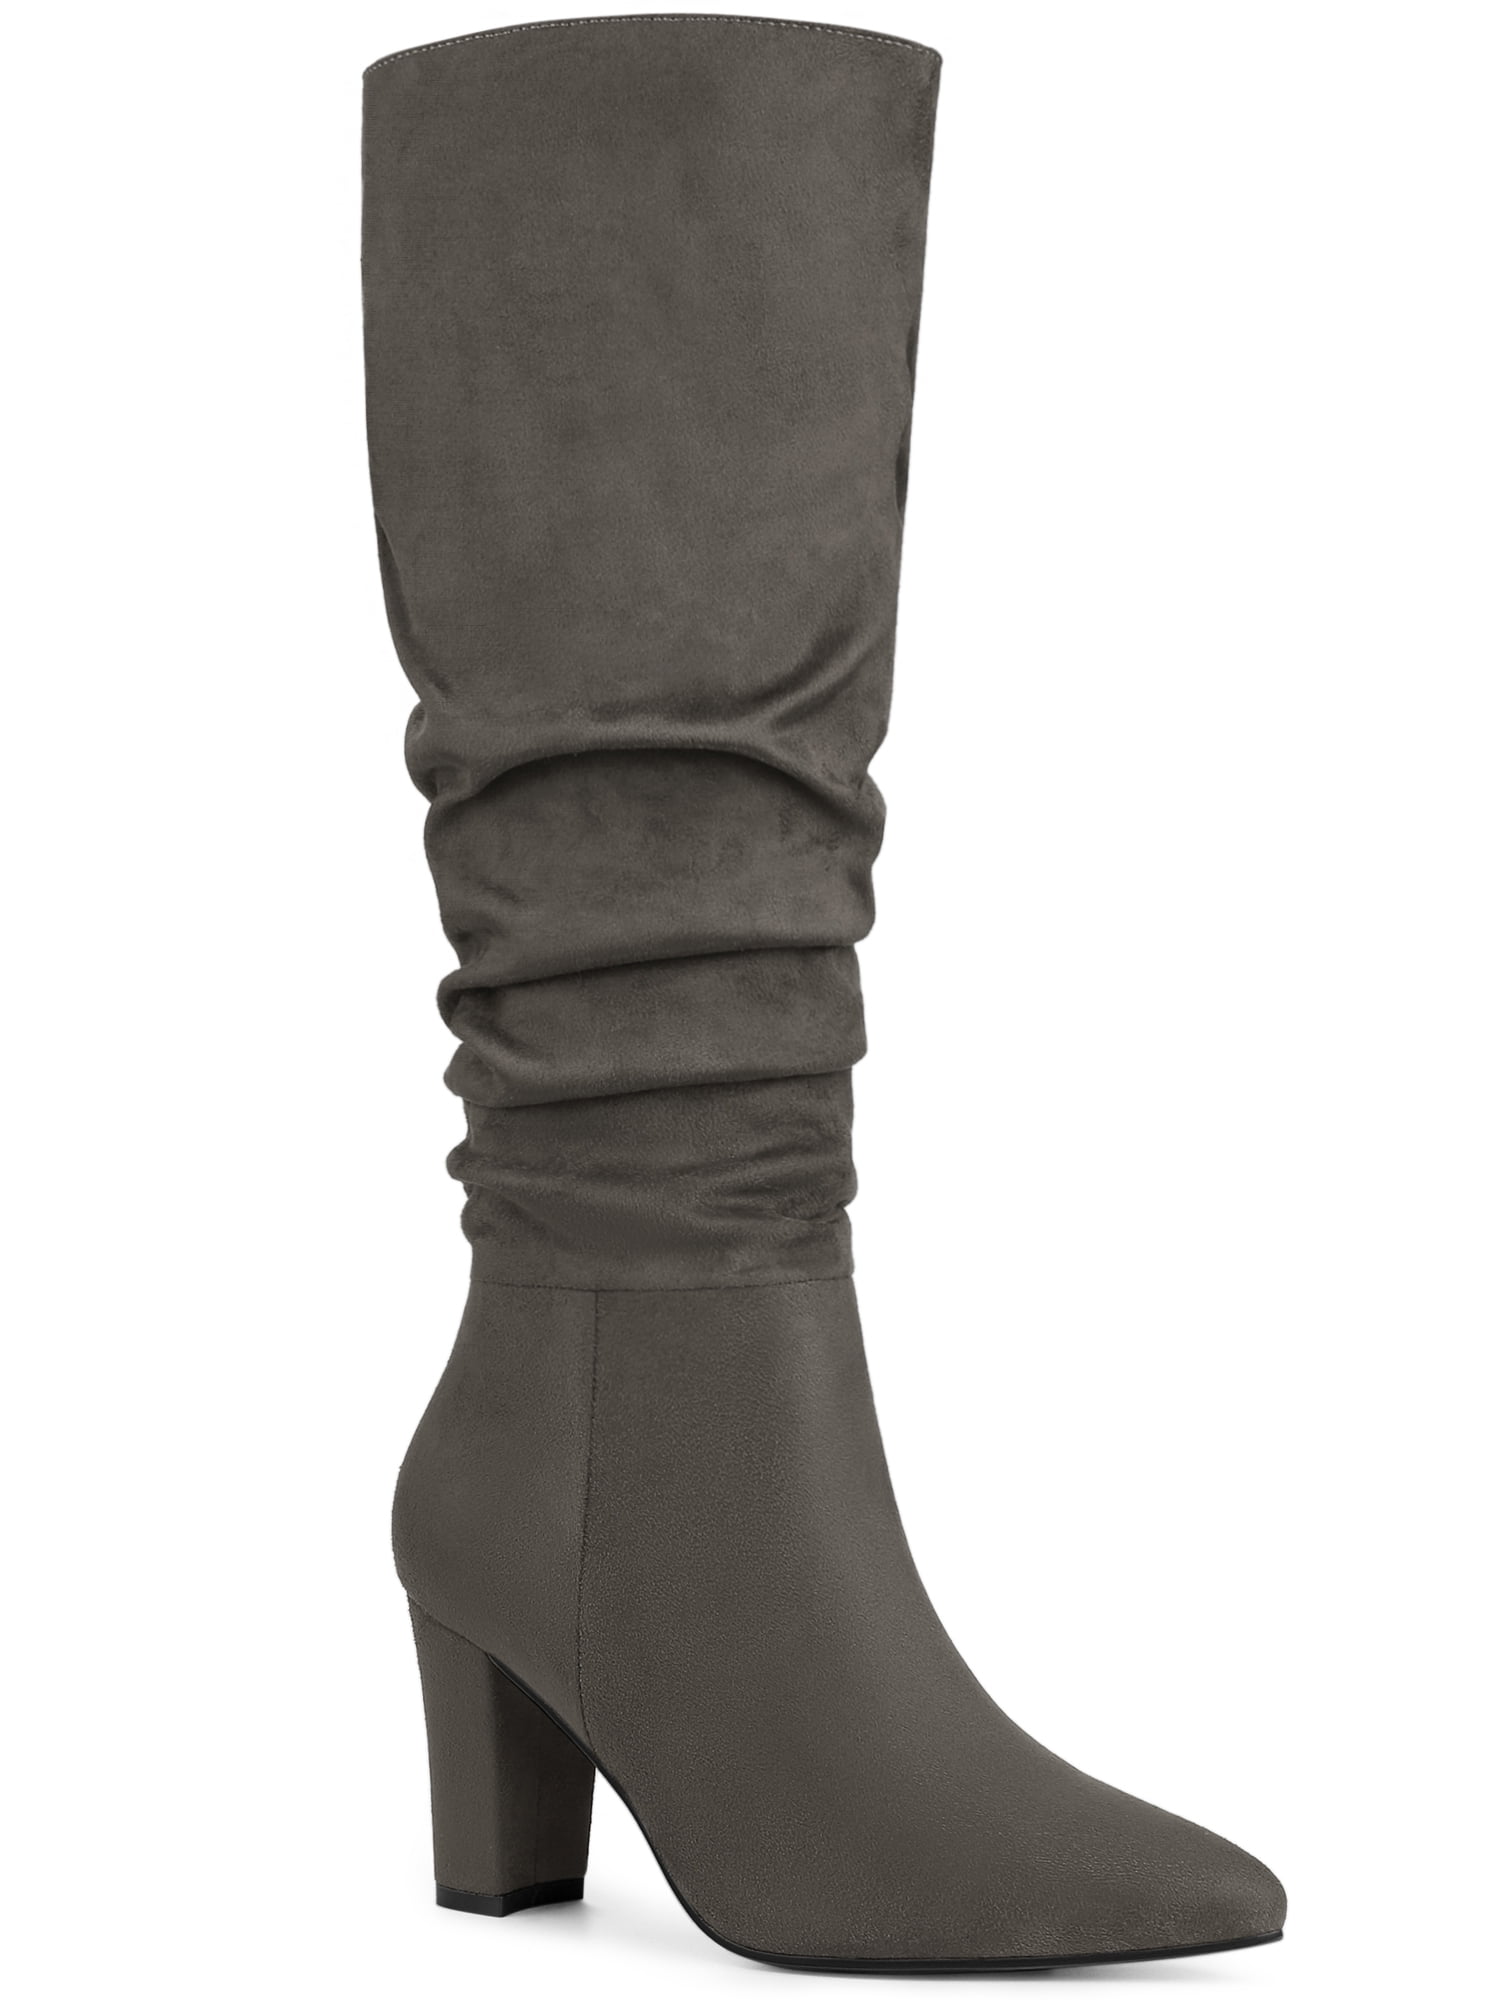 Allegra K Women's Pointed Toe Slouch Chunky Heel Knee High Boots ...